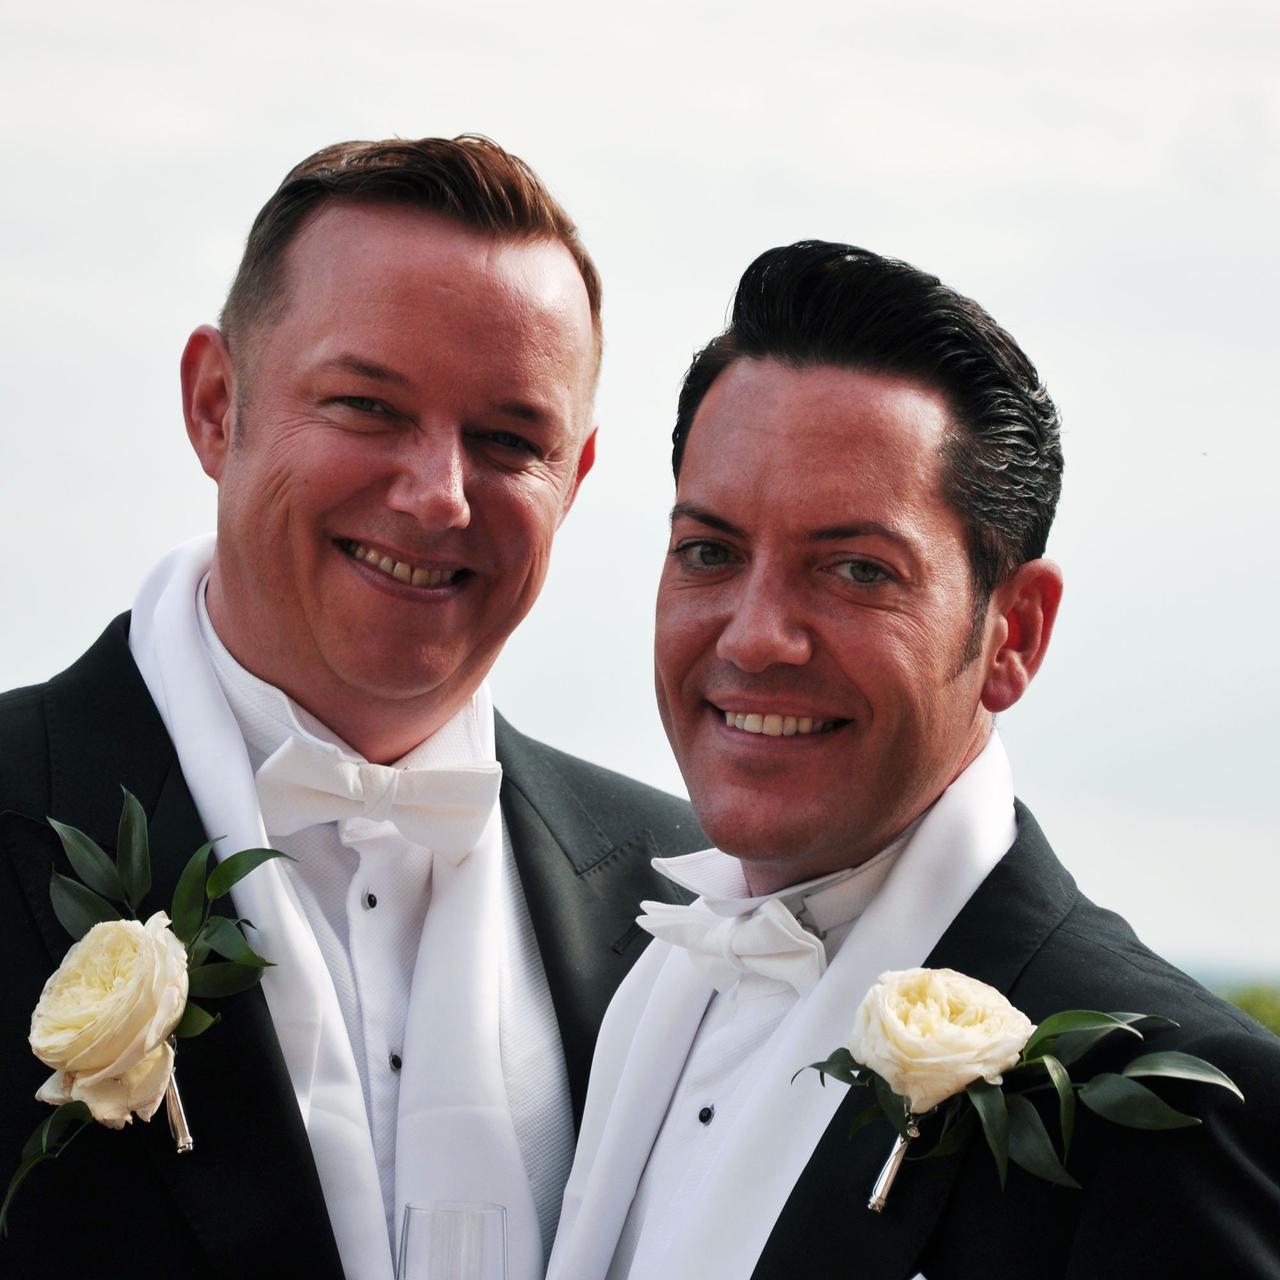 Meet the Men Who Changed Their Names After Getting Married - hitched.co.uk  image